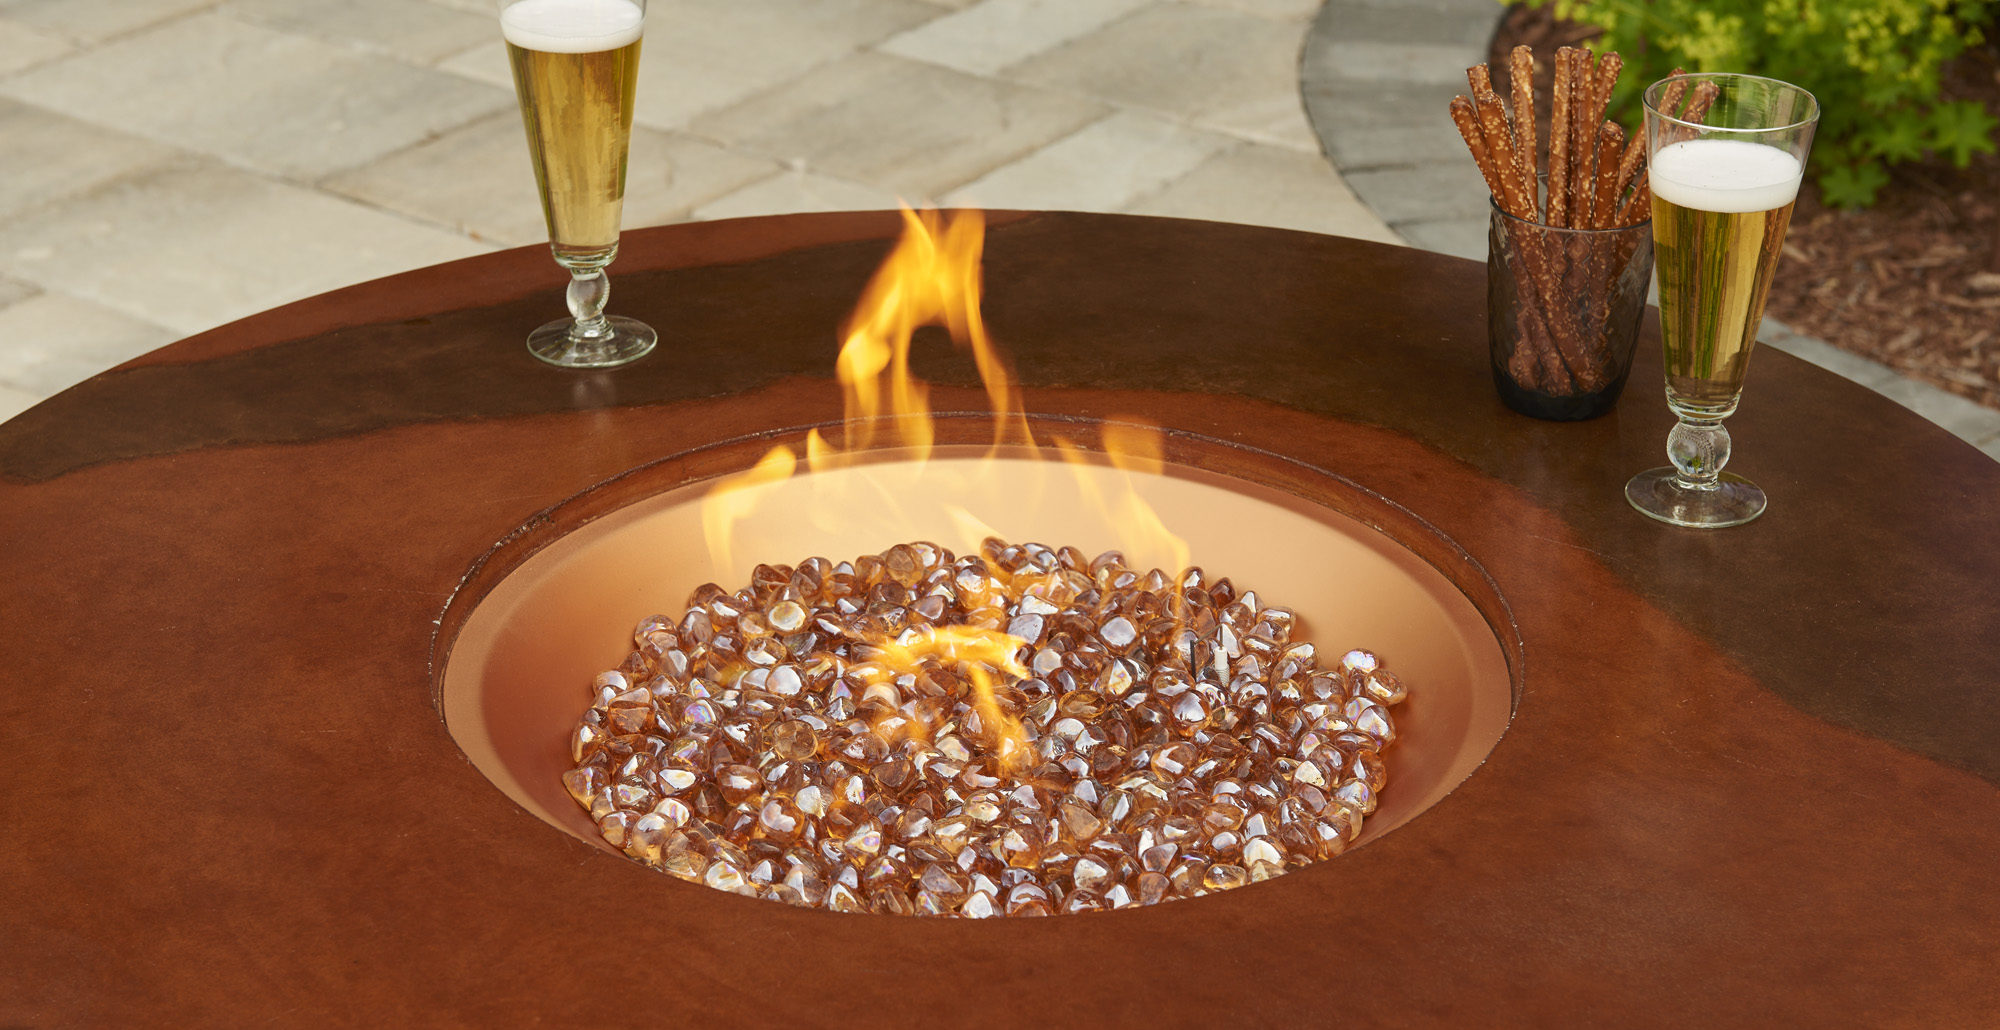 Fire Table with Glass Rocks